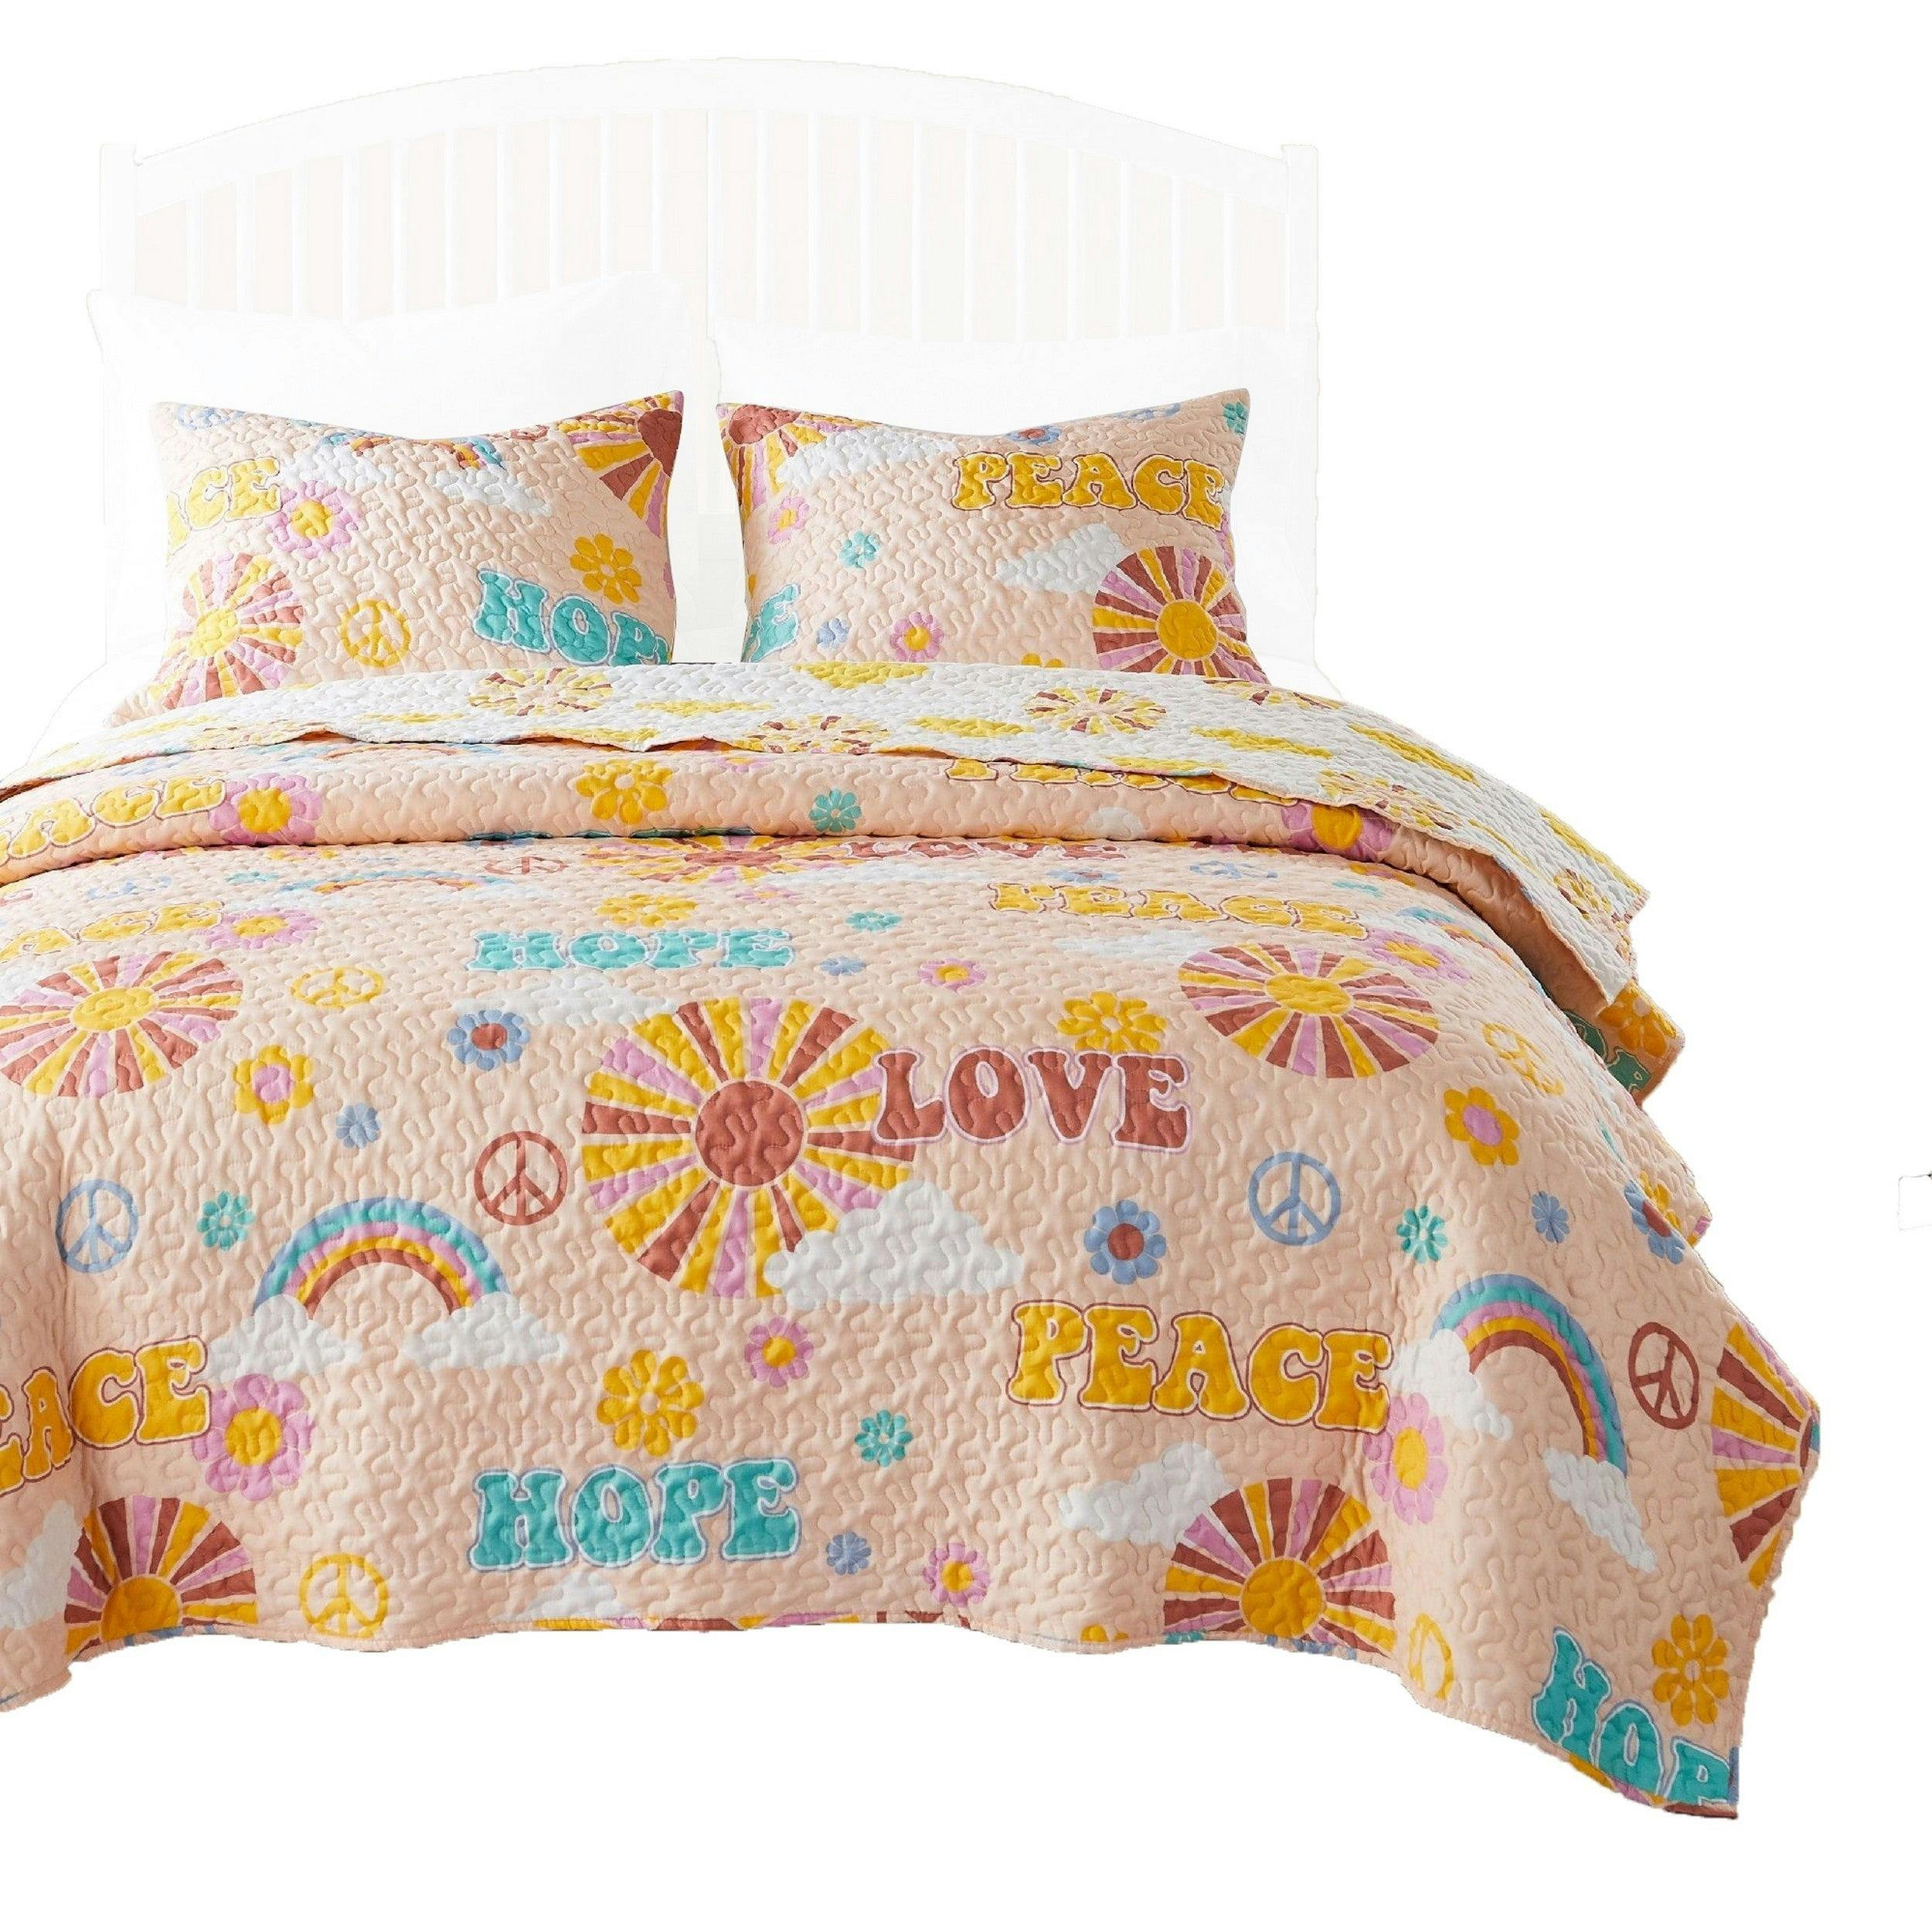 Country Charm Beige Queen Quilt Set with Rainbows & Clouds Print